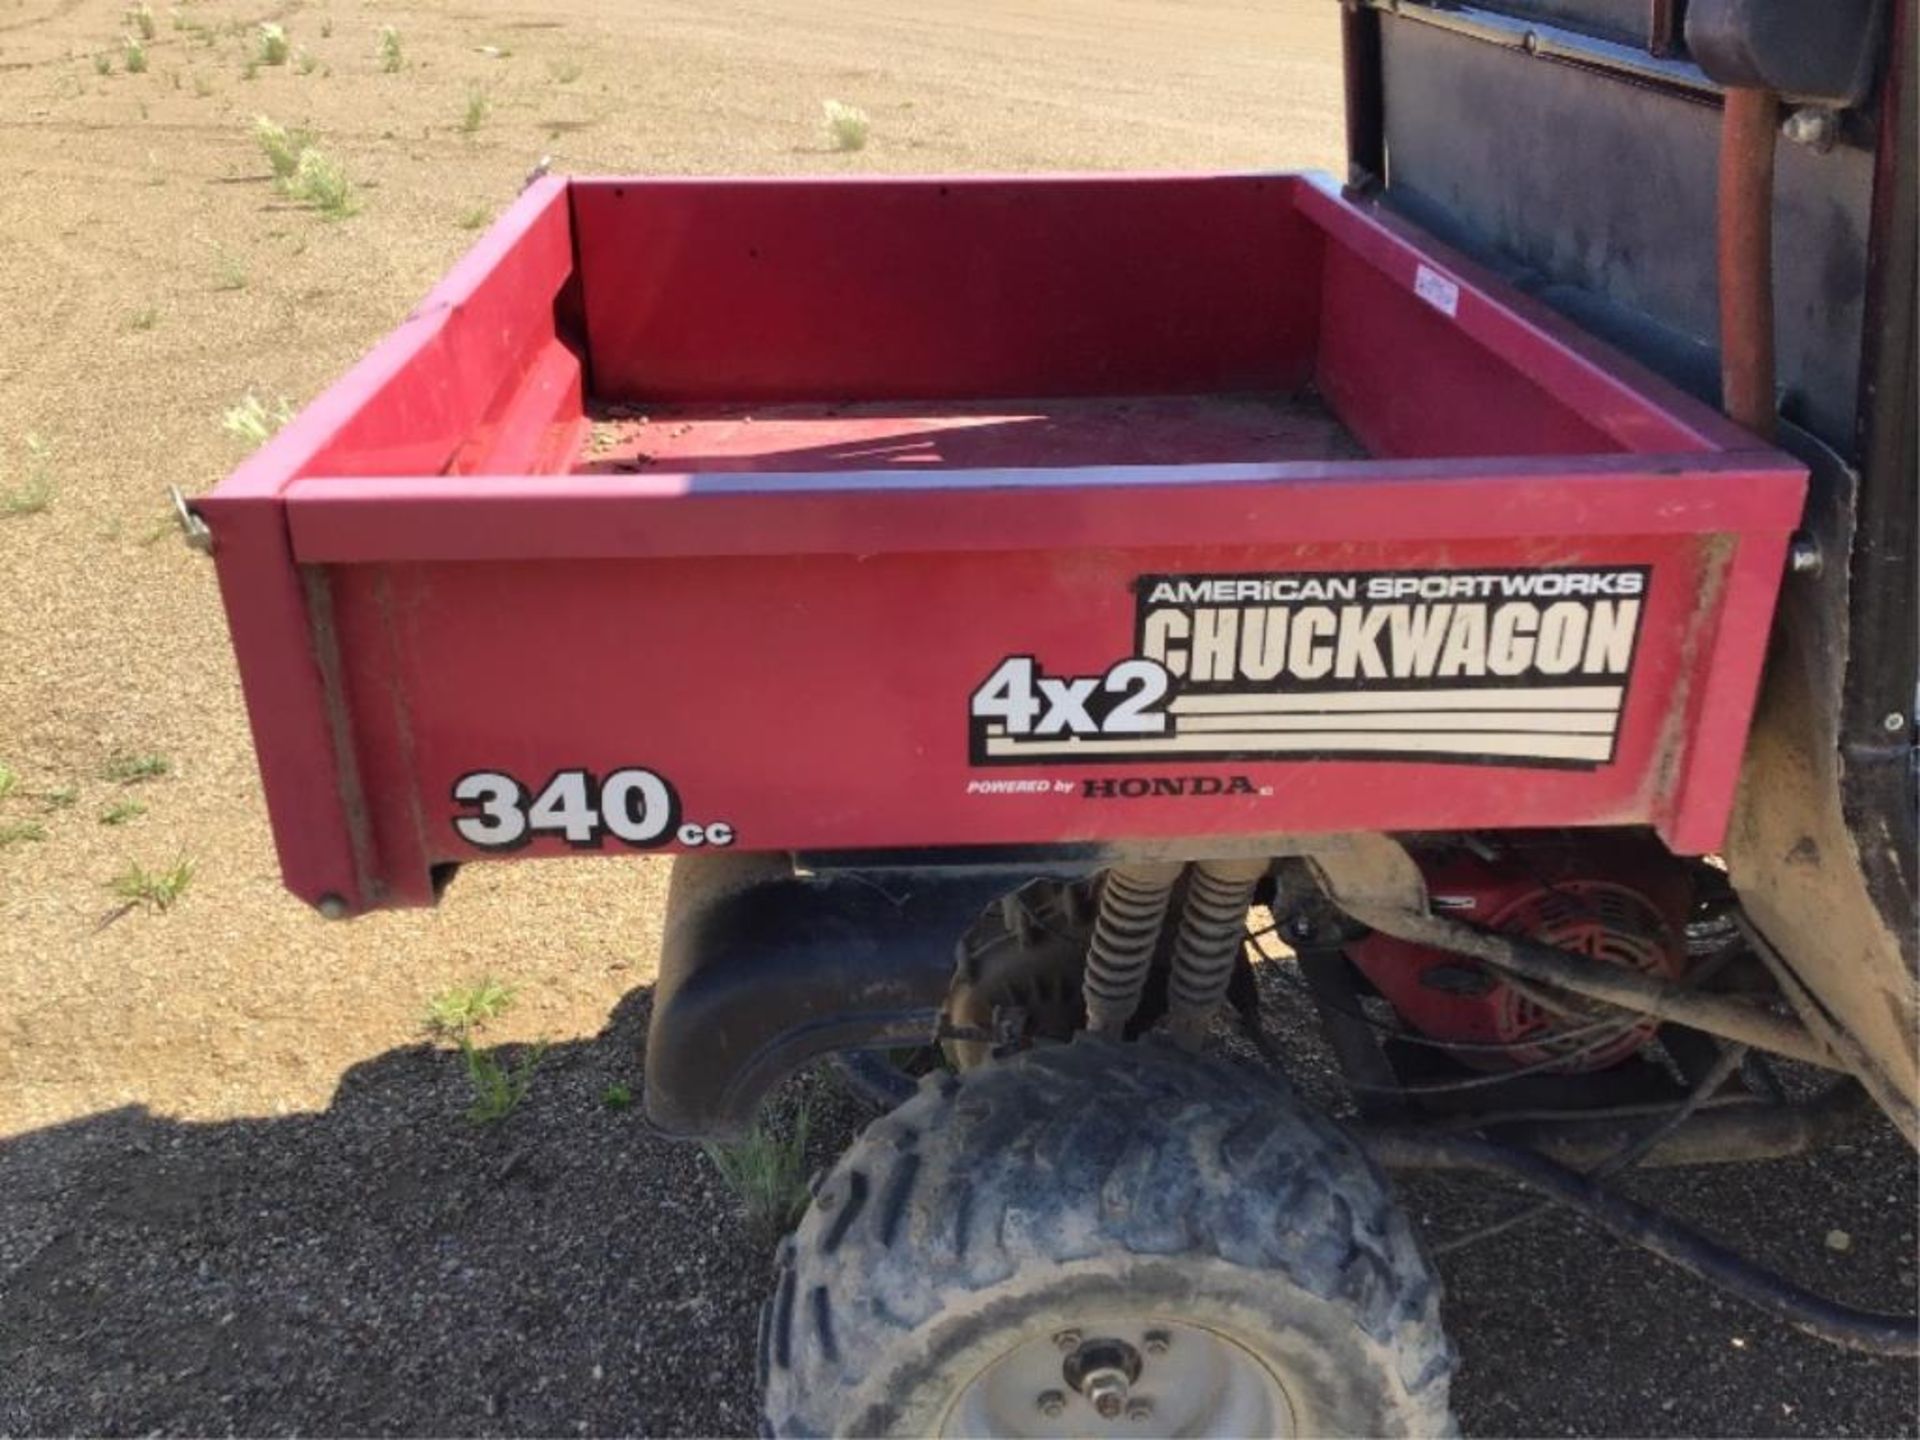 2008 Chuckwagon 4x2 Side-by-Side ATV VIN A4PUTXH1K8A15977A Electric & Pull Start, 2in Rear - Image 2 of 9